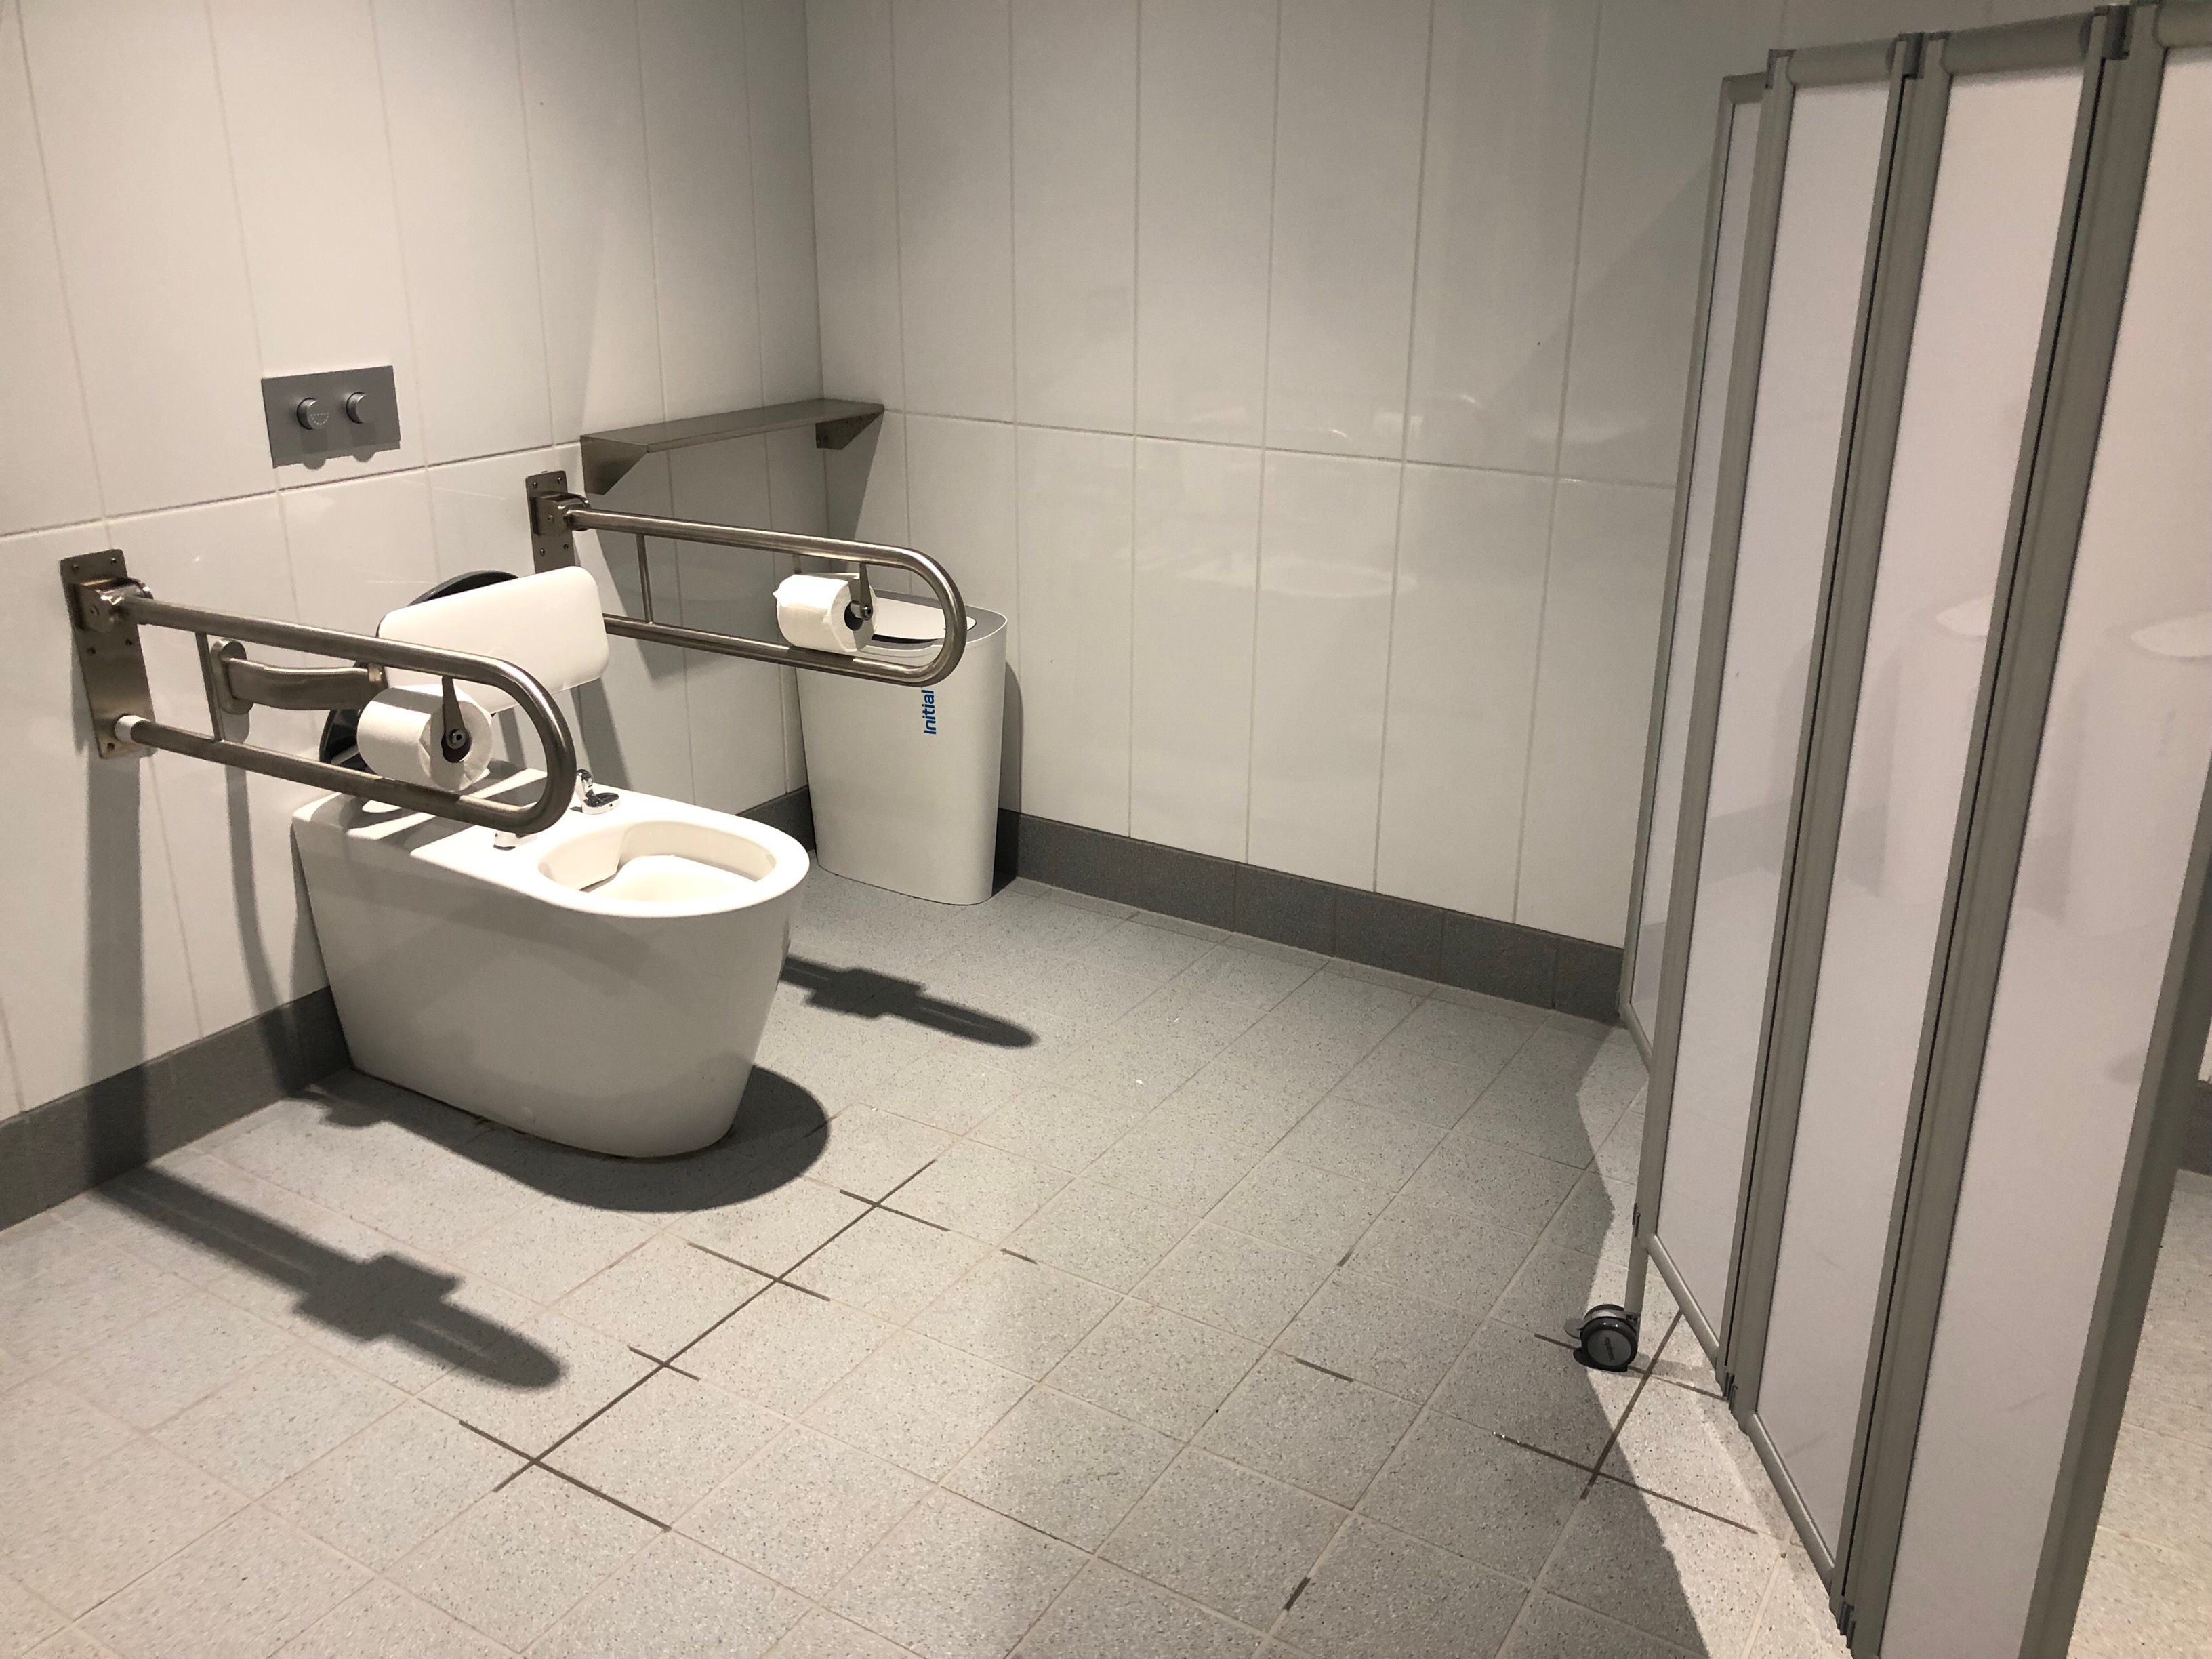 Image of accessible toilet facilities in the hoist changeroom, showcasing the handrails located on either side of the toilet.